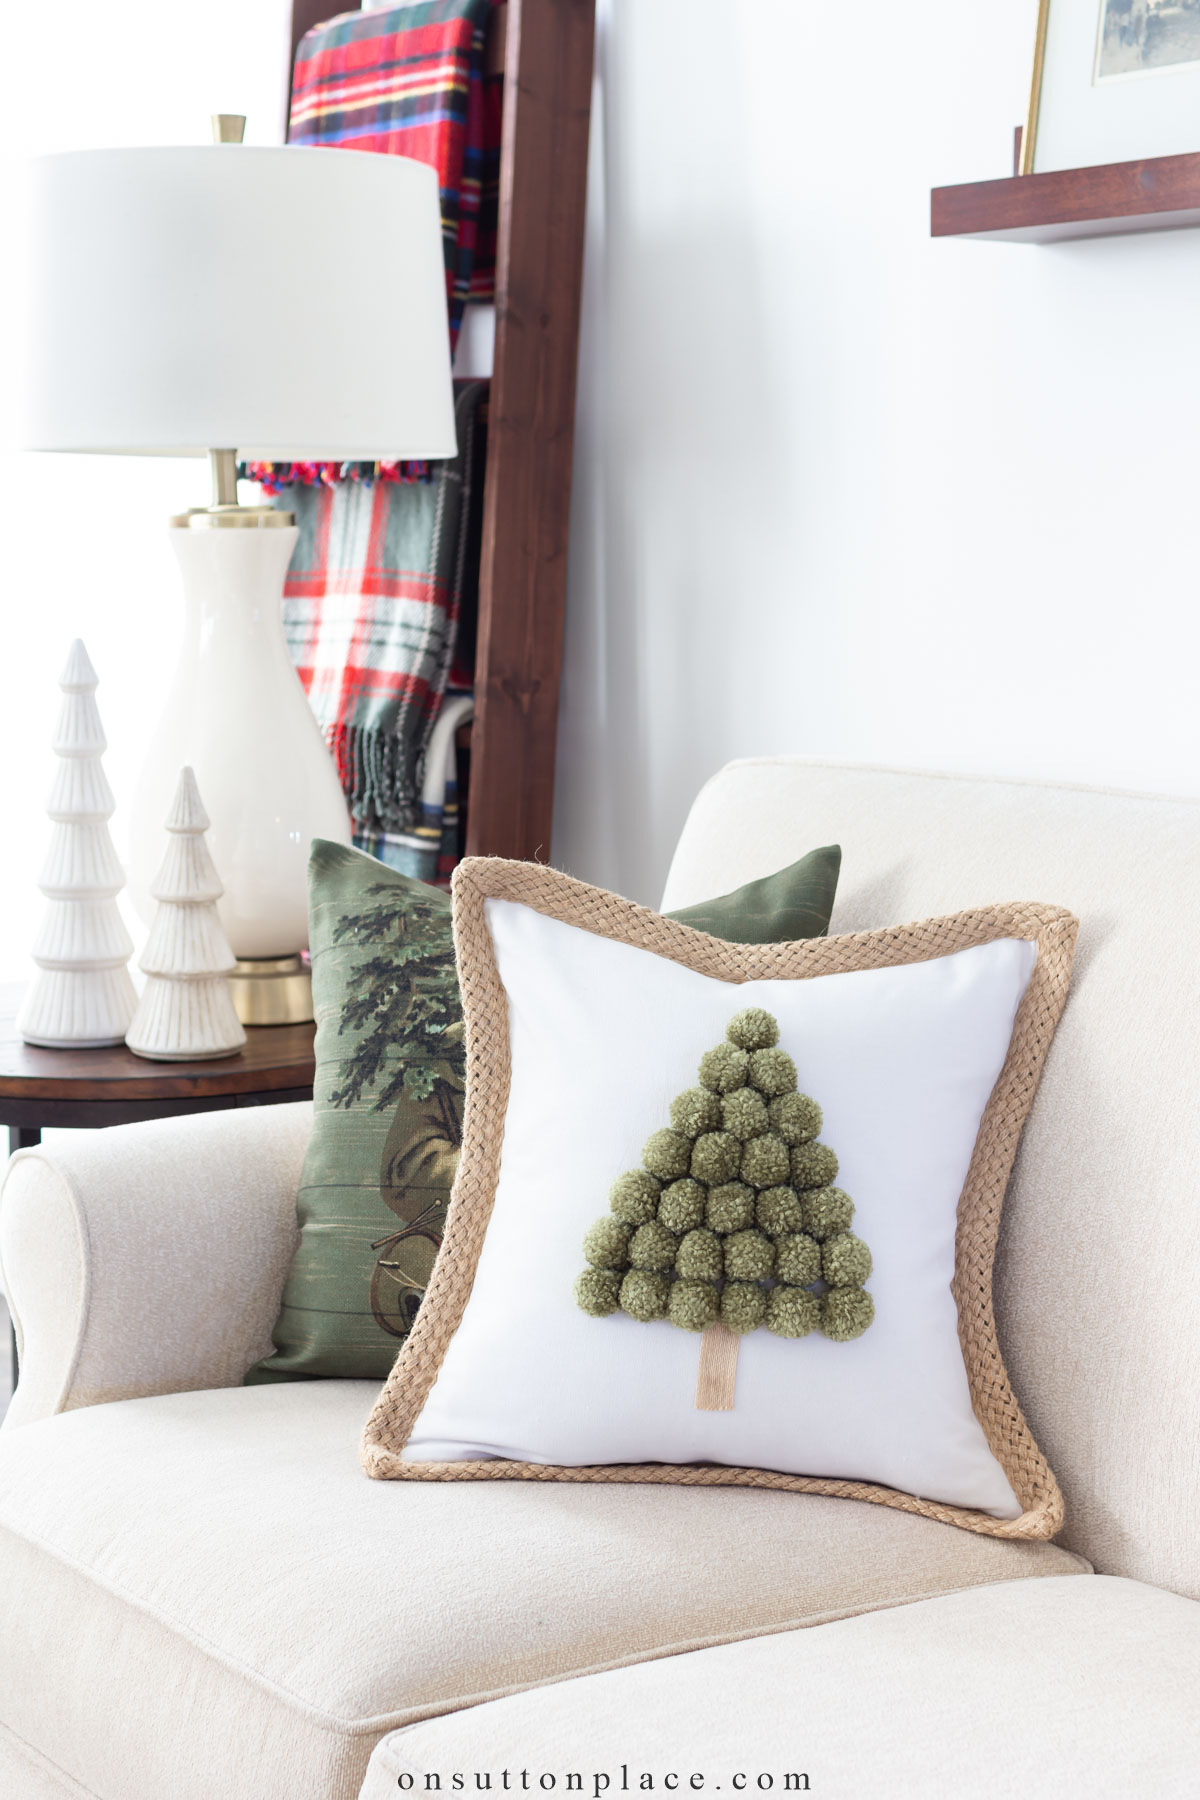 https://www.onsuttonplace.com/wp-content/uploads/2022/12/christmas-tree-pillow-on-sofa.jpg